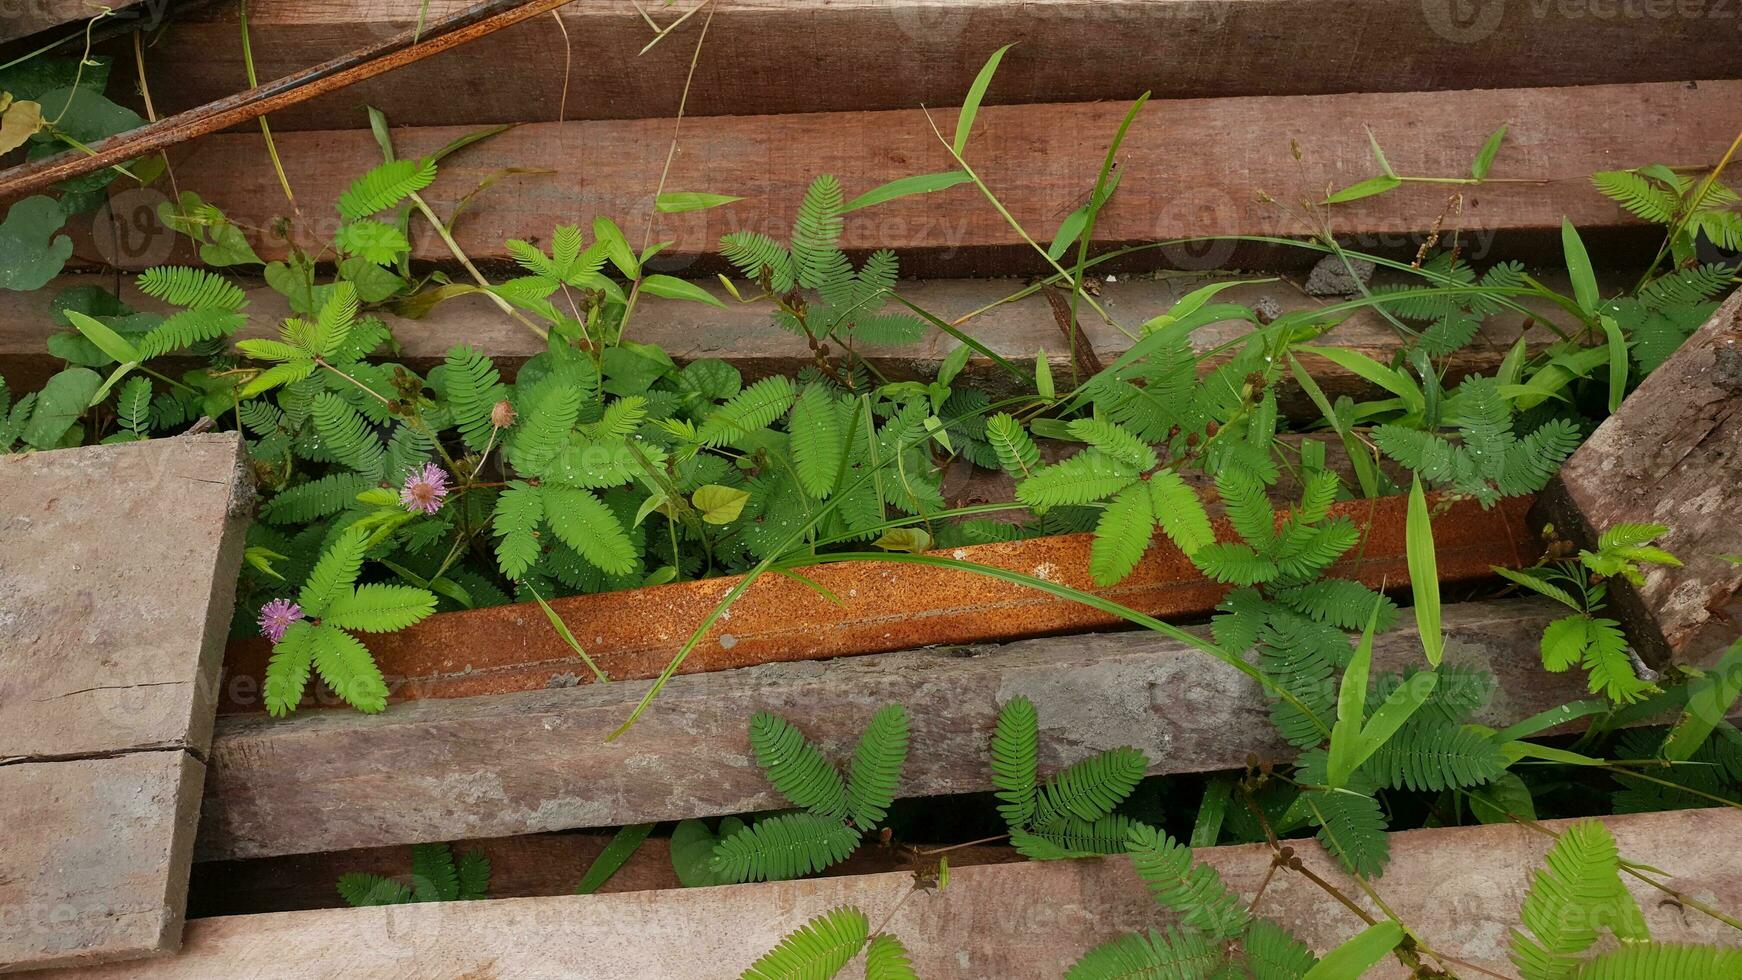 shy princess plant or it's call Mimosa pudica among the scrap wood photo